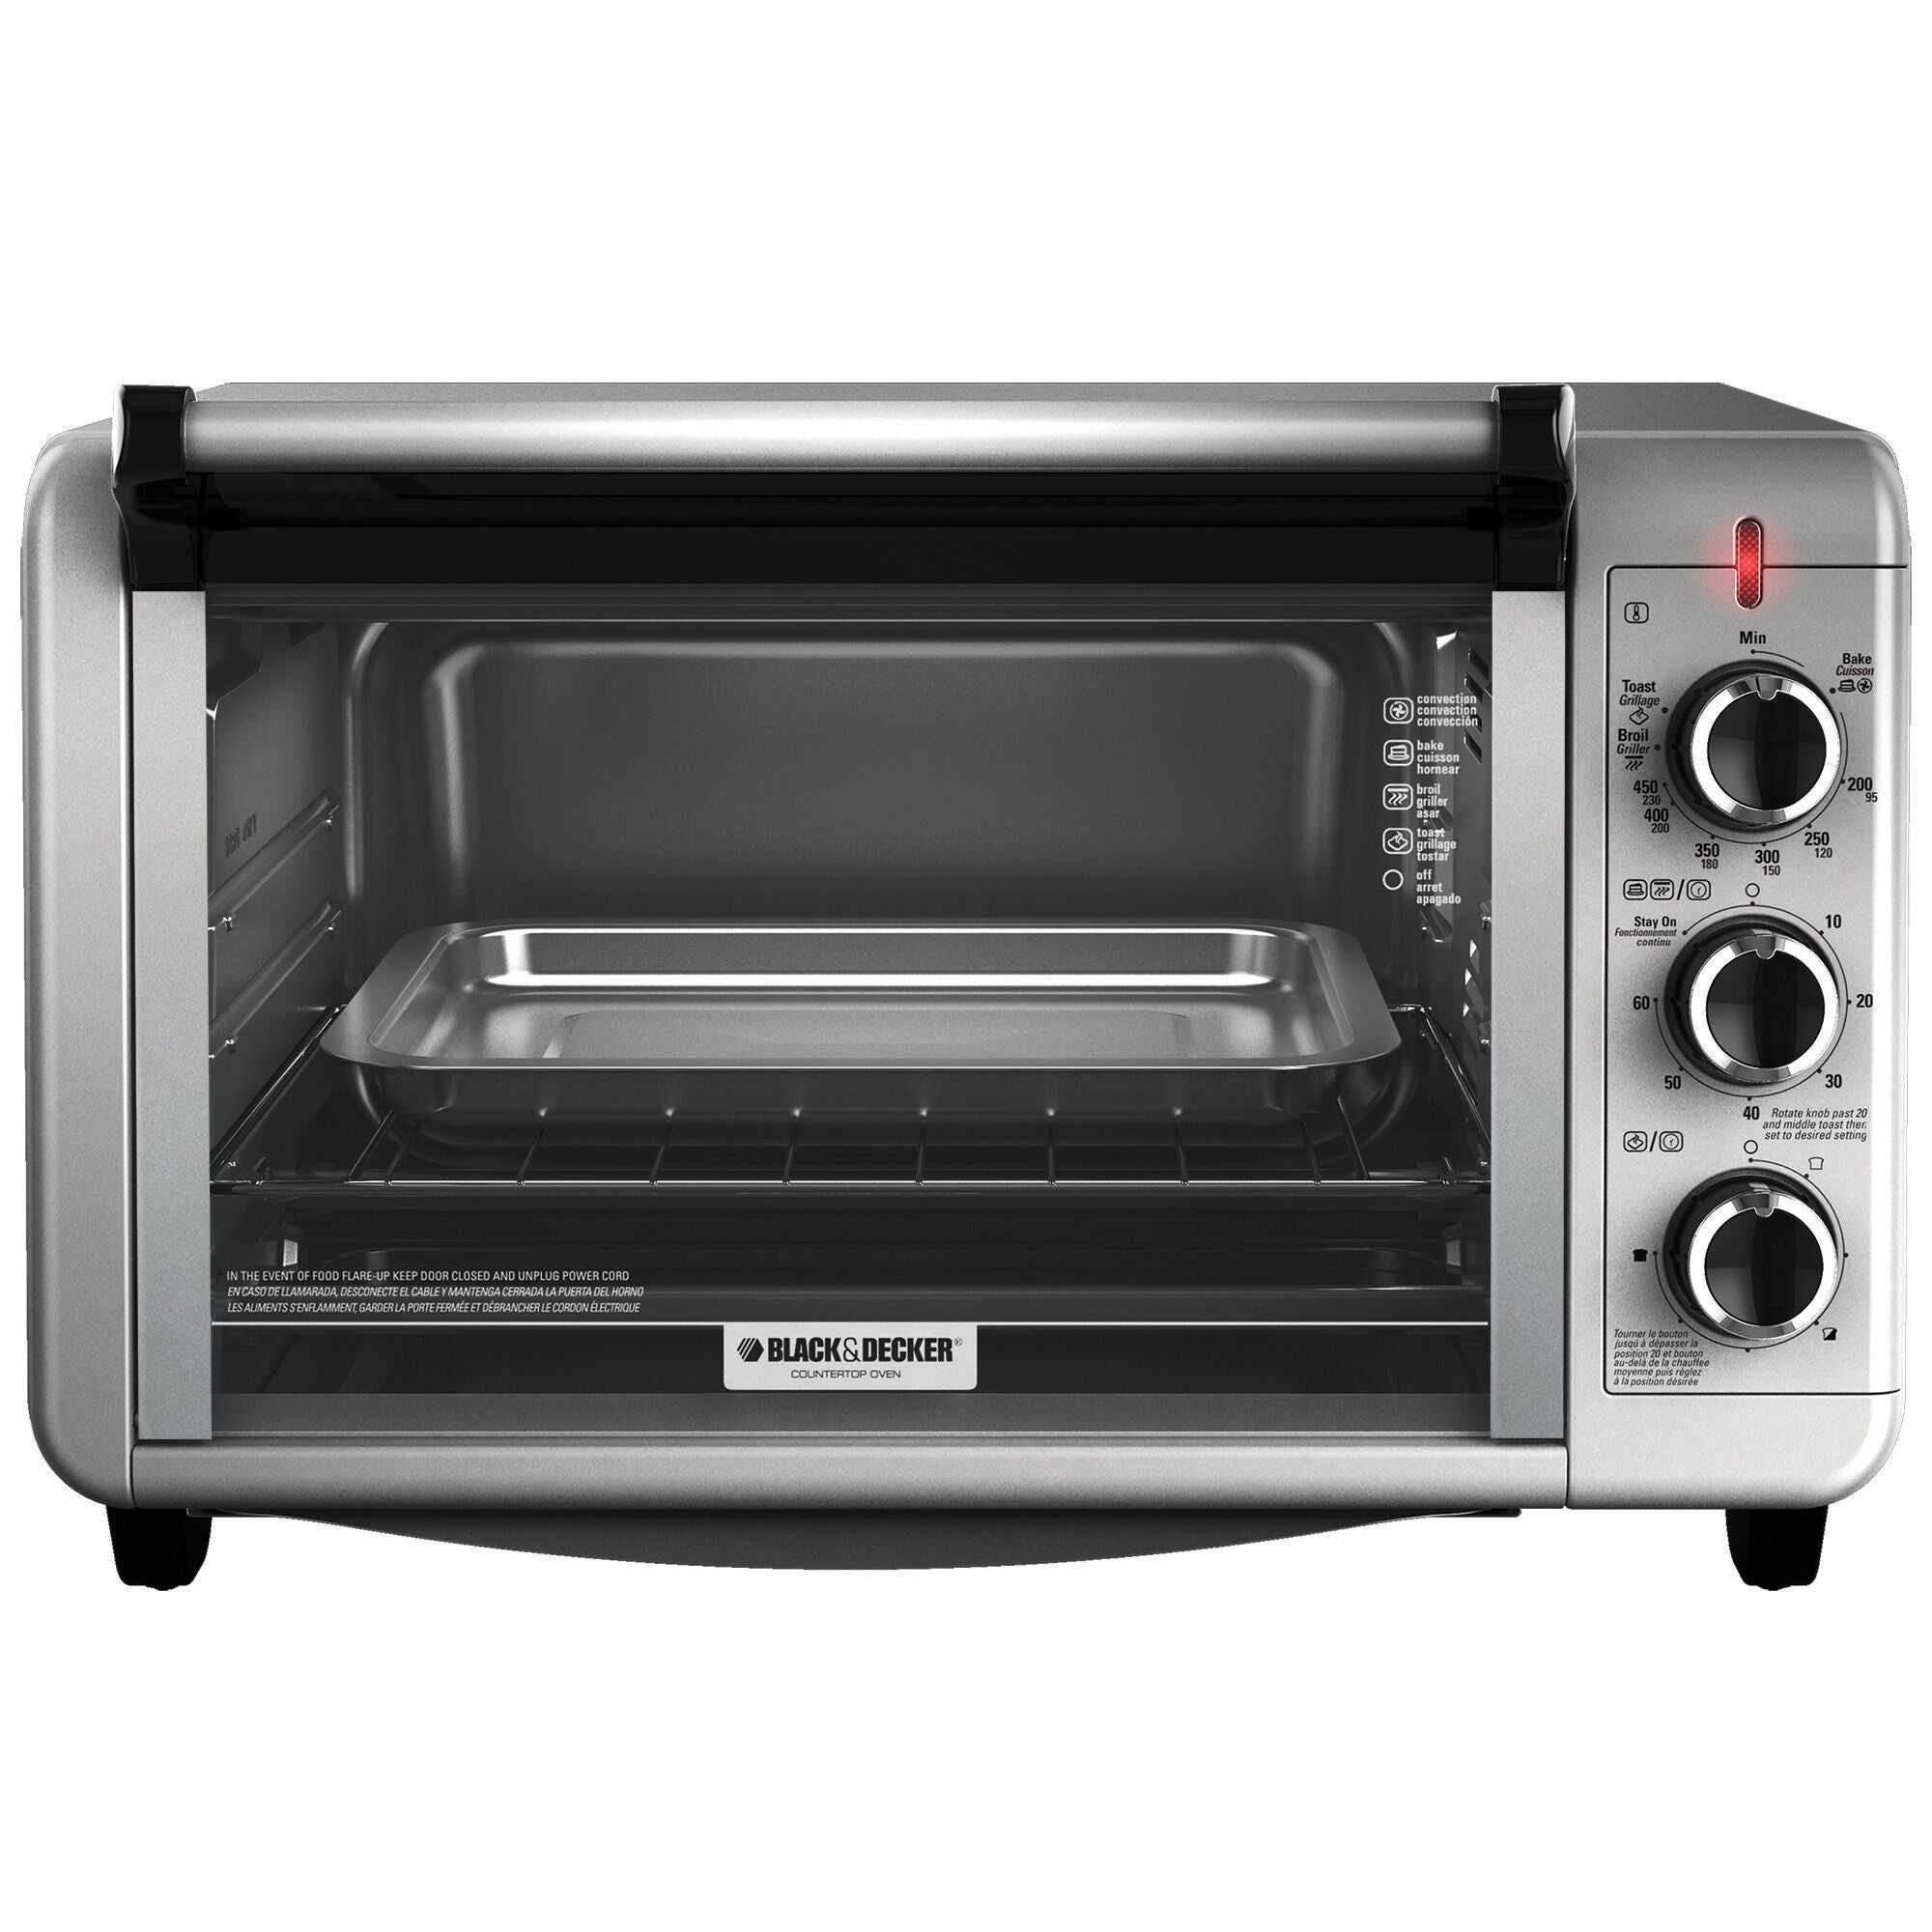 BLACK+DECKER 6-Slice Digital Convection Toaster Oven, Stainless